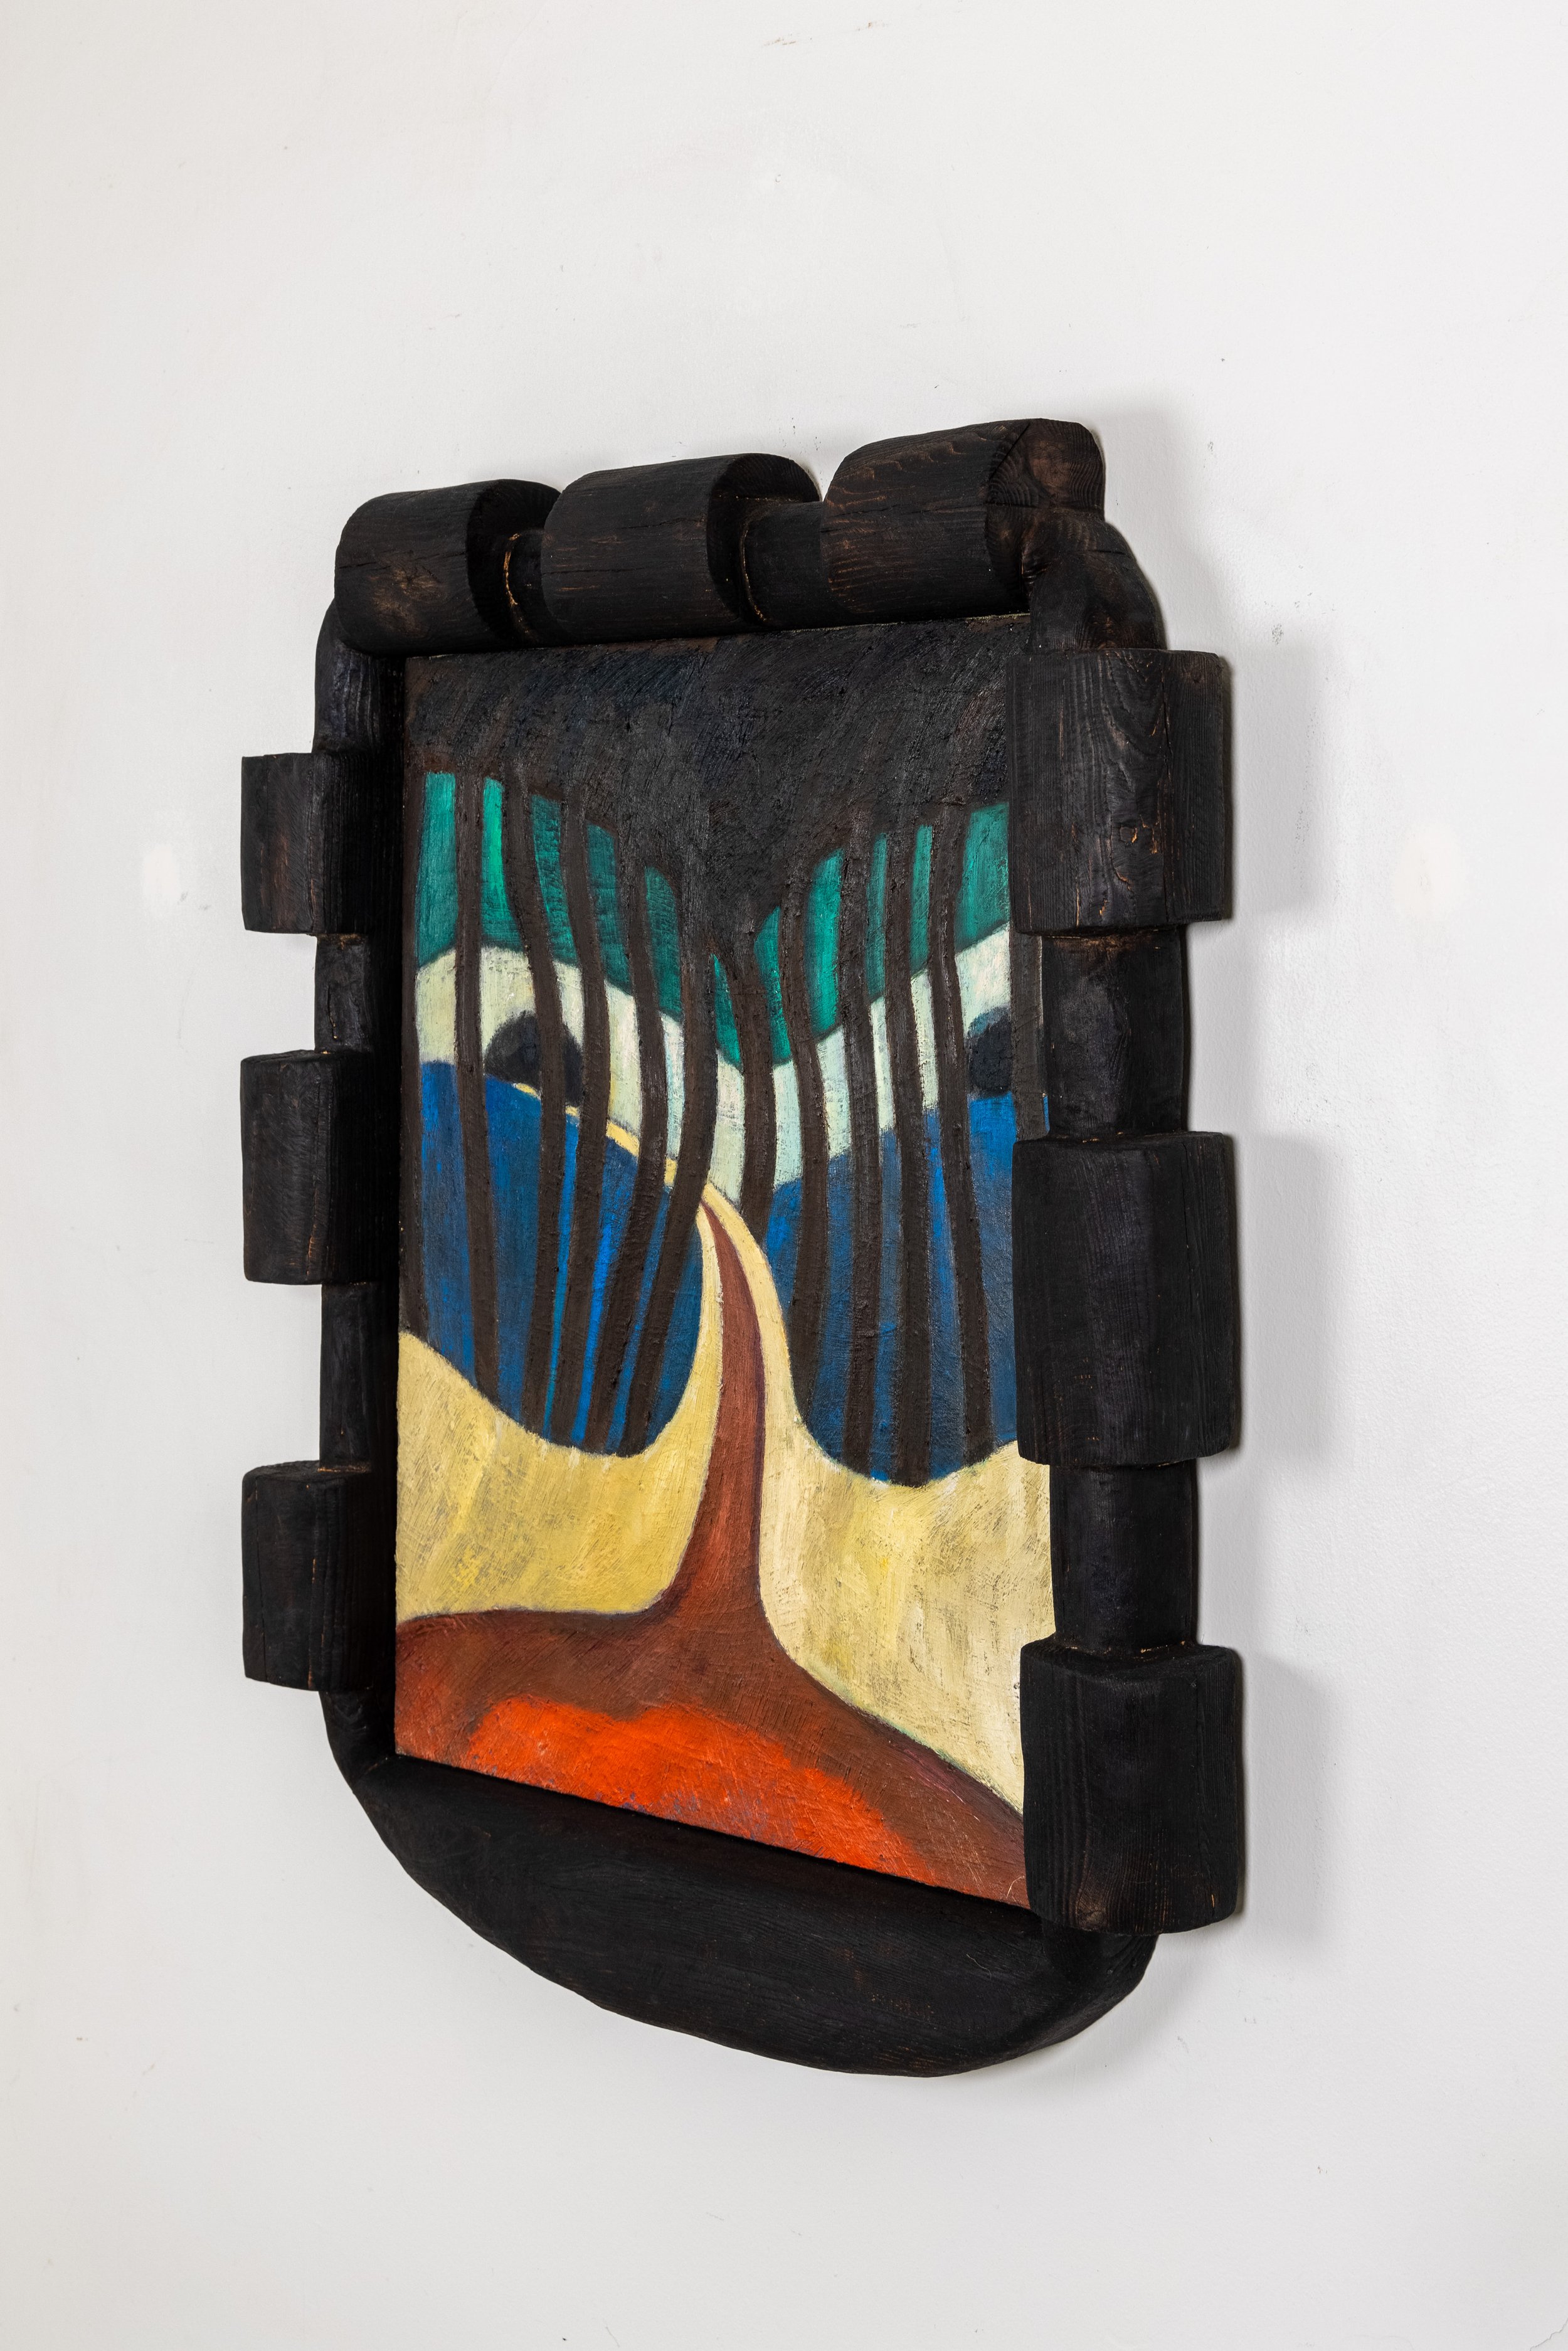 Miss Cantine, 2021, Oil on canvas in charred wood frame 30 x 28 x 6 inches